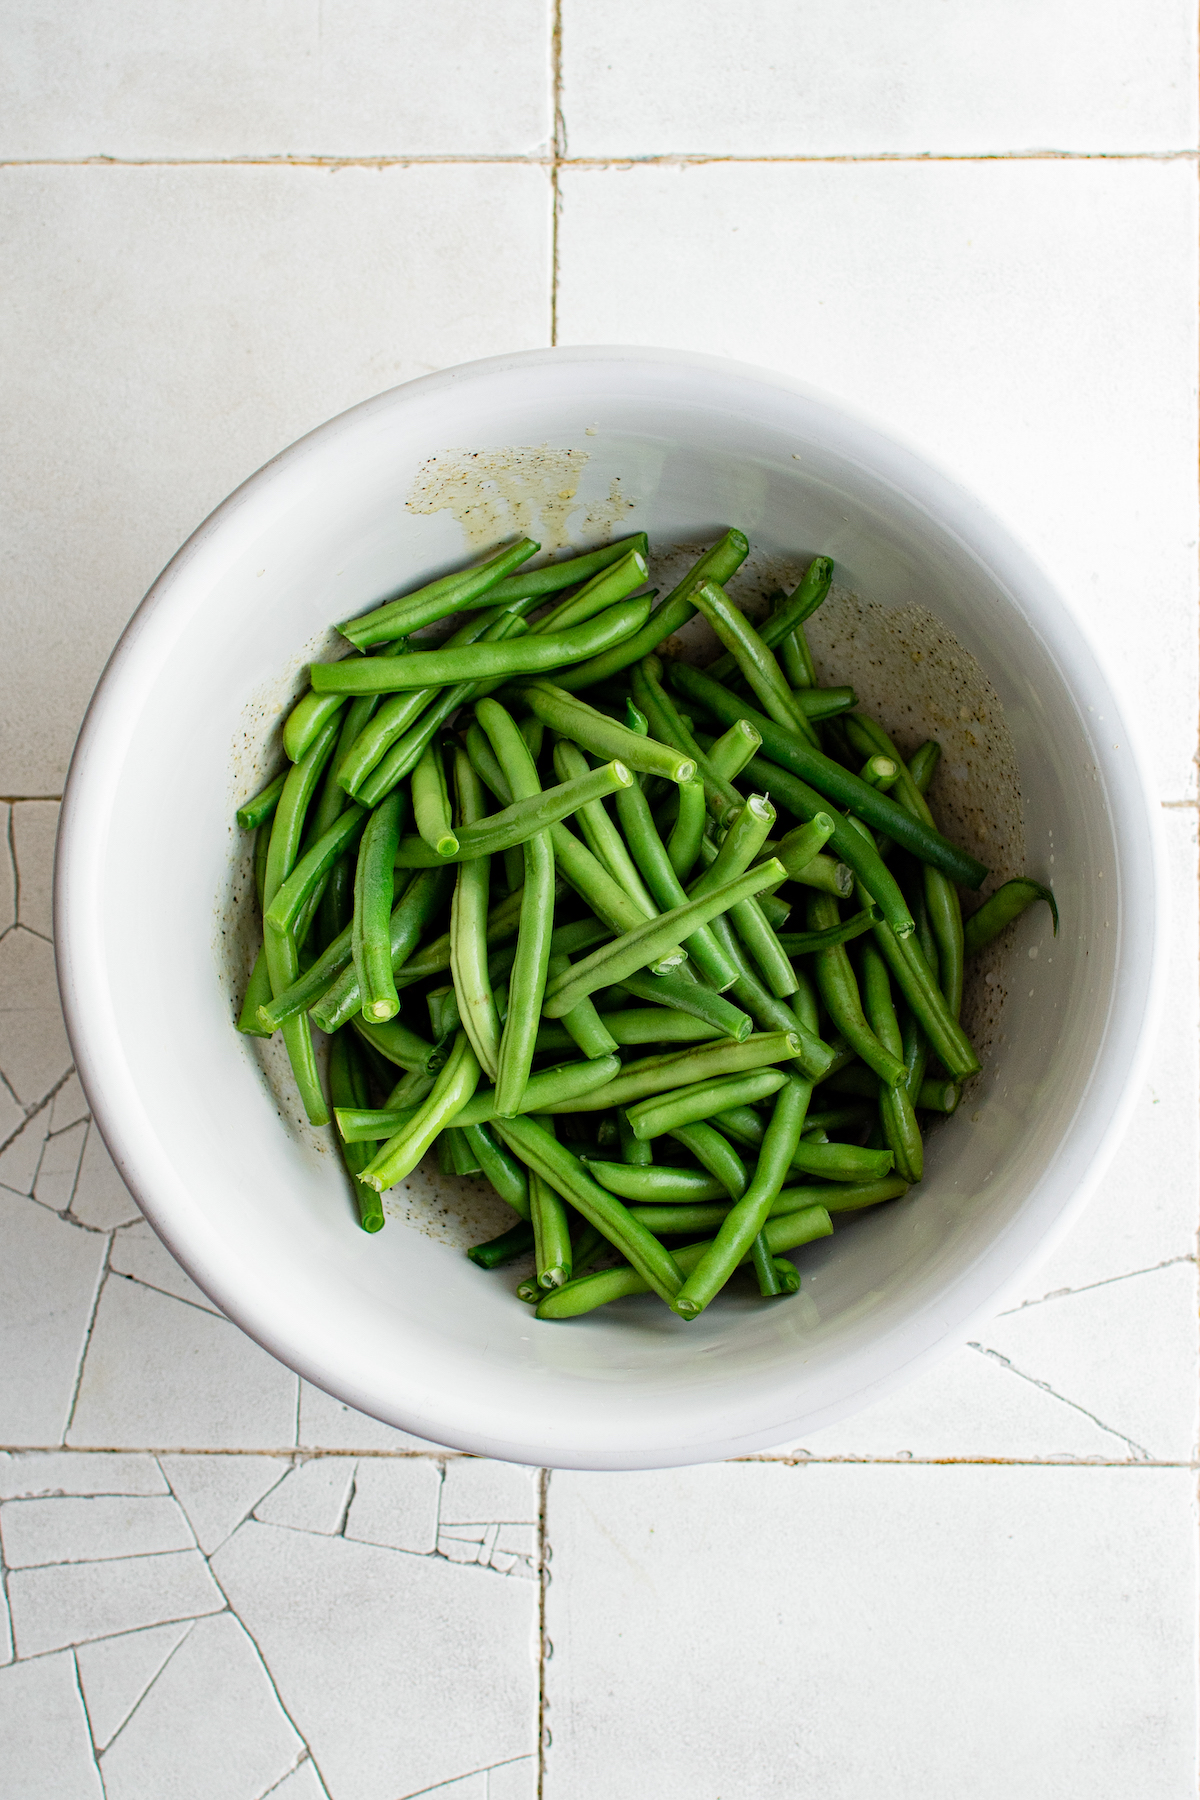 Green beans tossed with oil and seasonings in a mixing bowl.